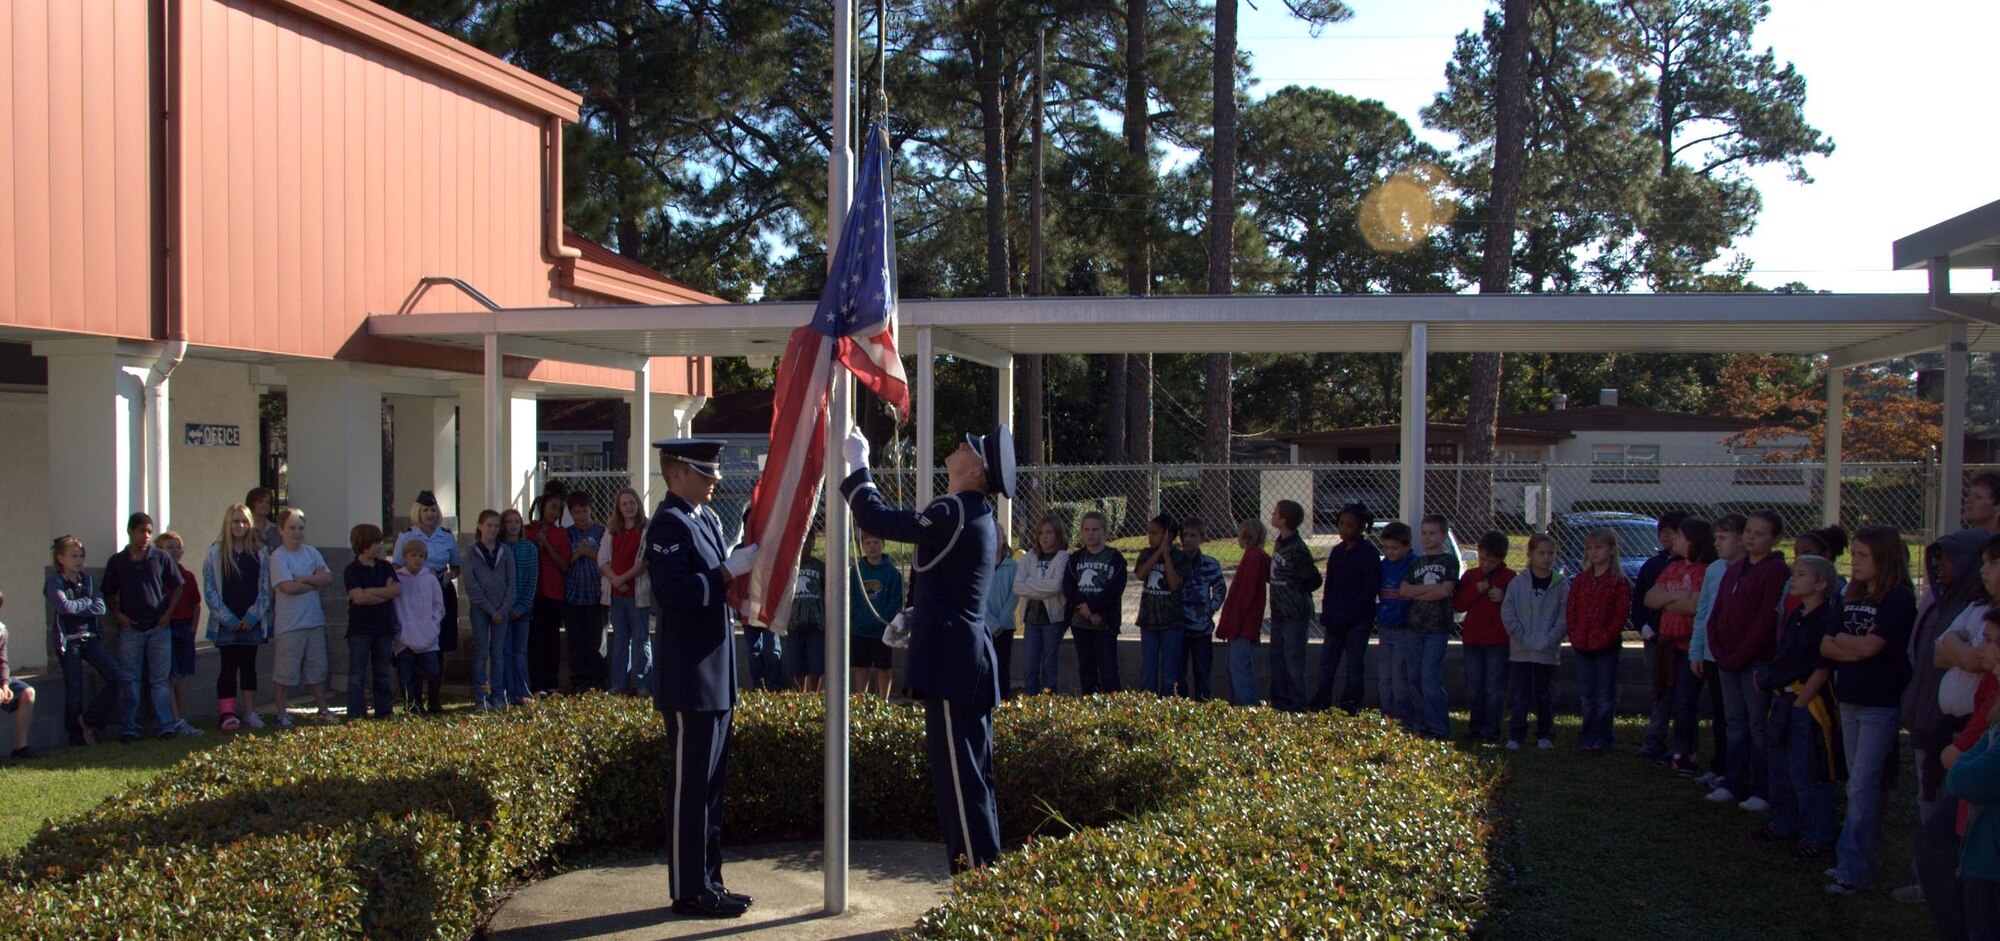 Tyndall Air Force Base Honor Guard showcase proper American Flag etiquette
to more than 60 Lynn Haven Elementary students Nov. 2. The Honor Guard
educated the children on proper handling of the U.S. flag.  (U.S. Air Force
photo by: Lt. Col. Malcolm Kemeny)

